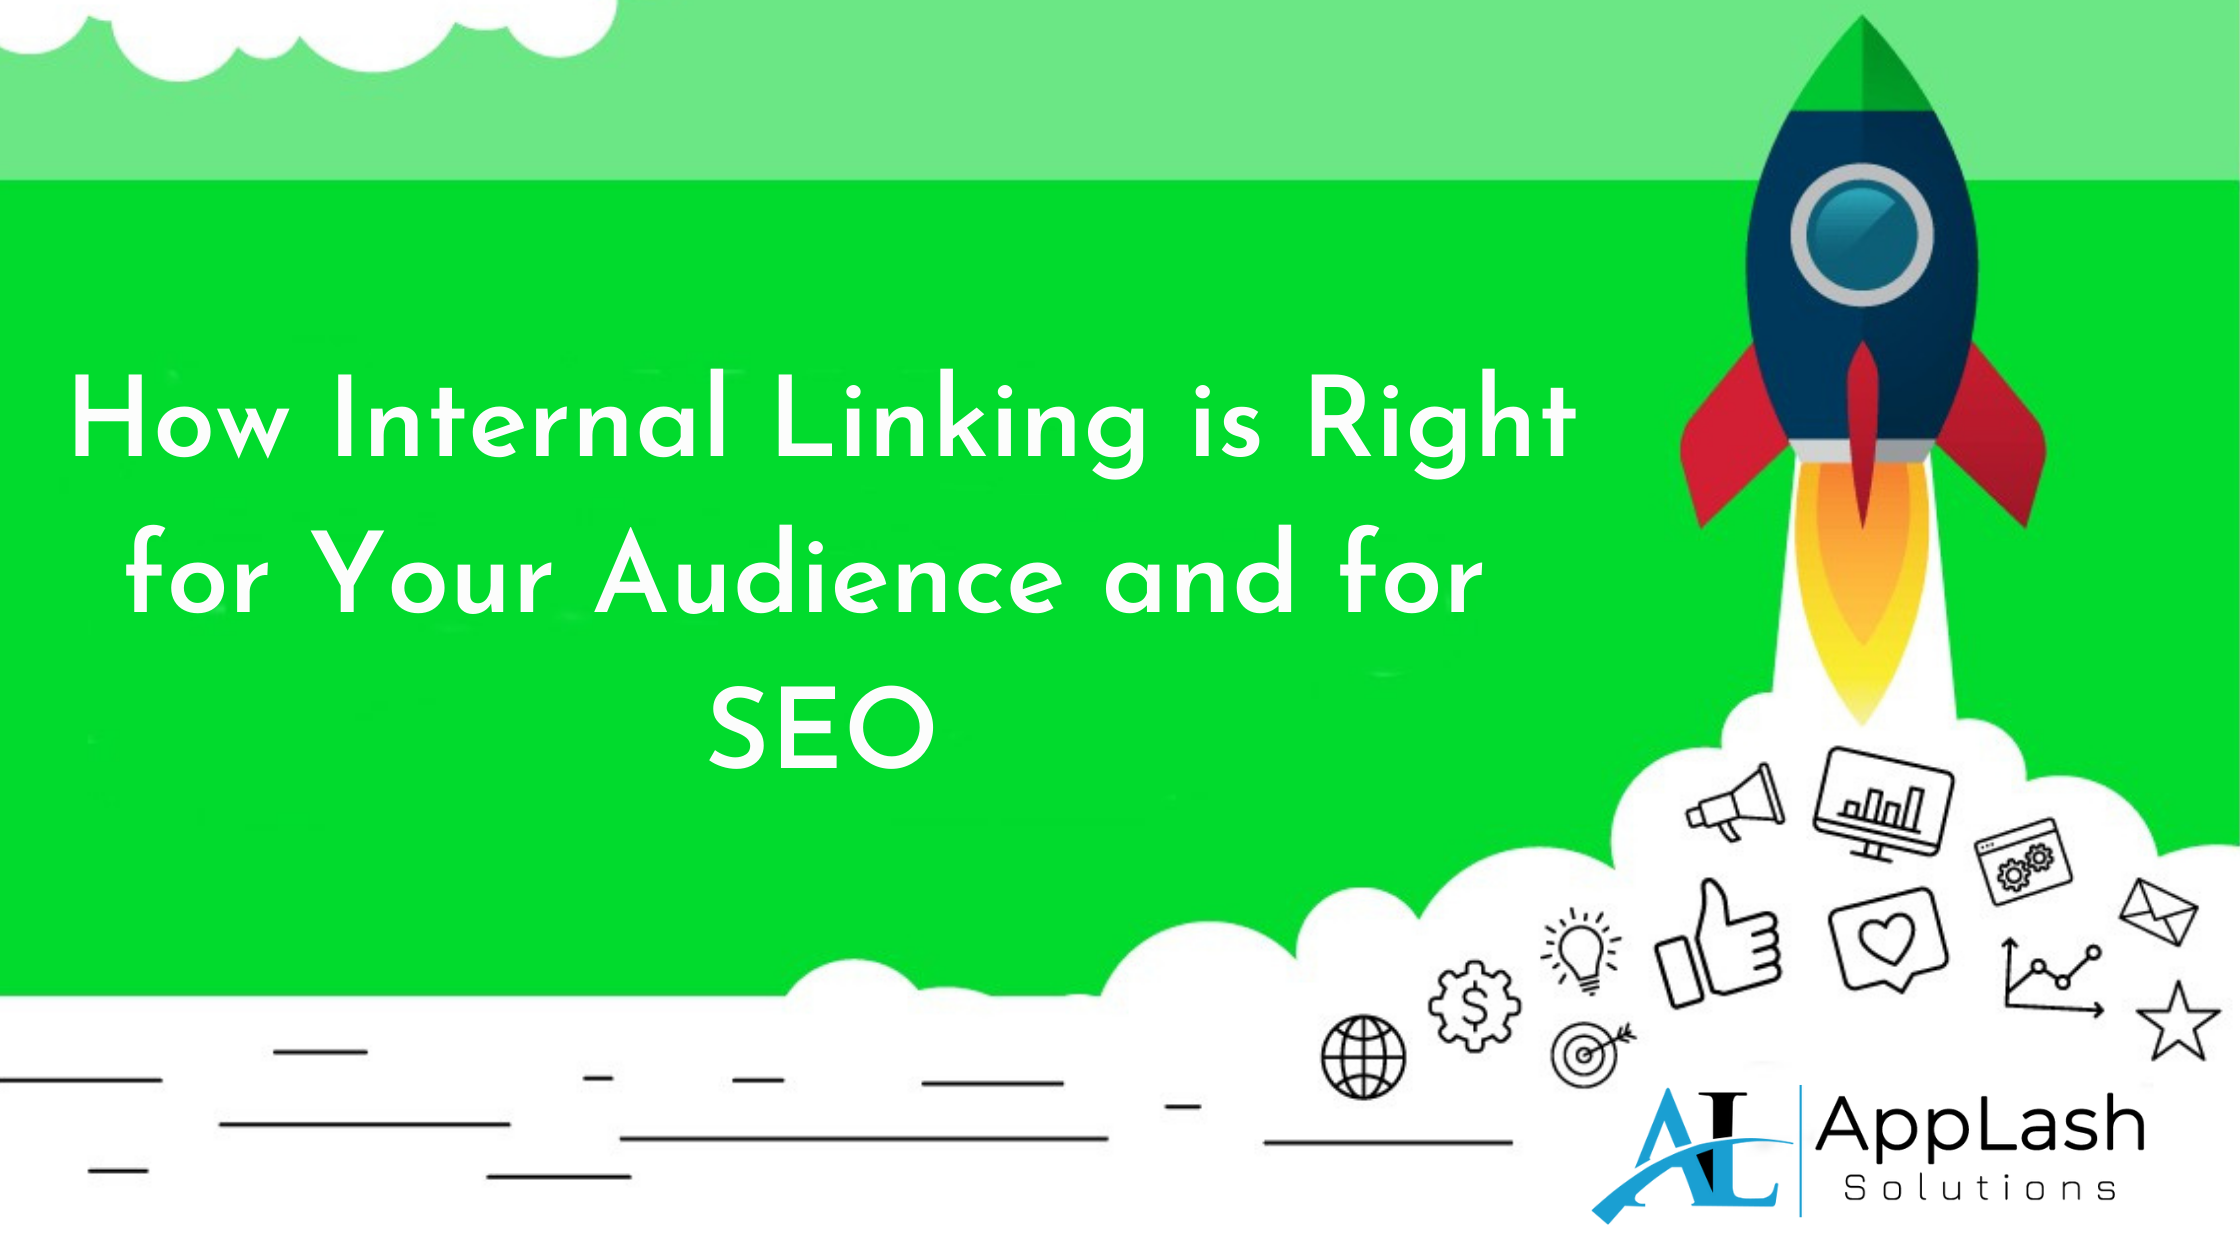 How Internal Linking is Right for Your Audience and for SEO